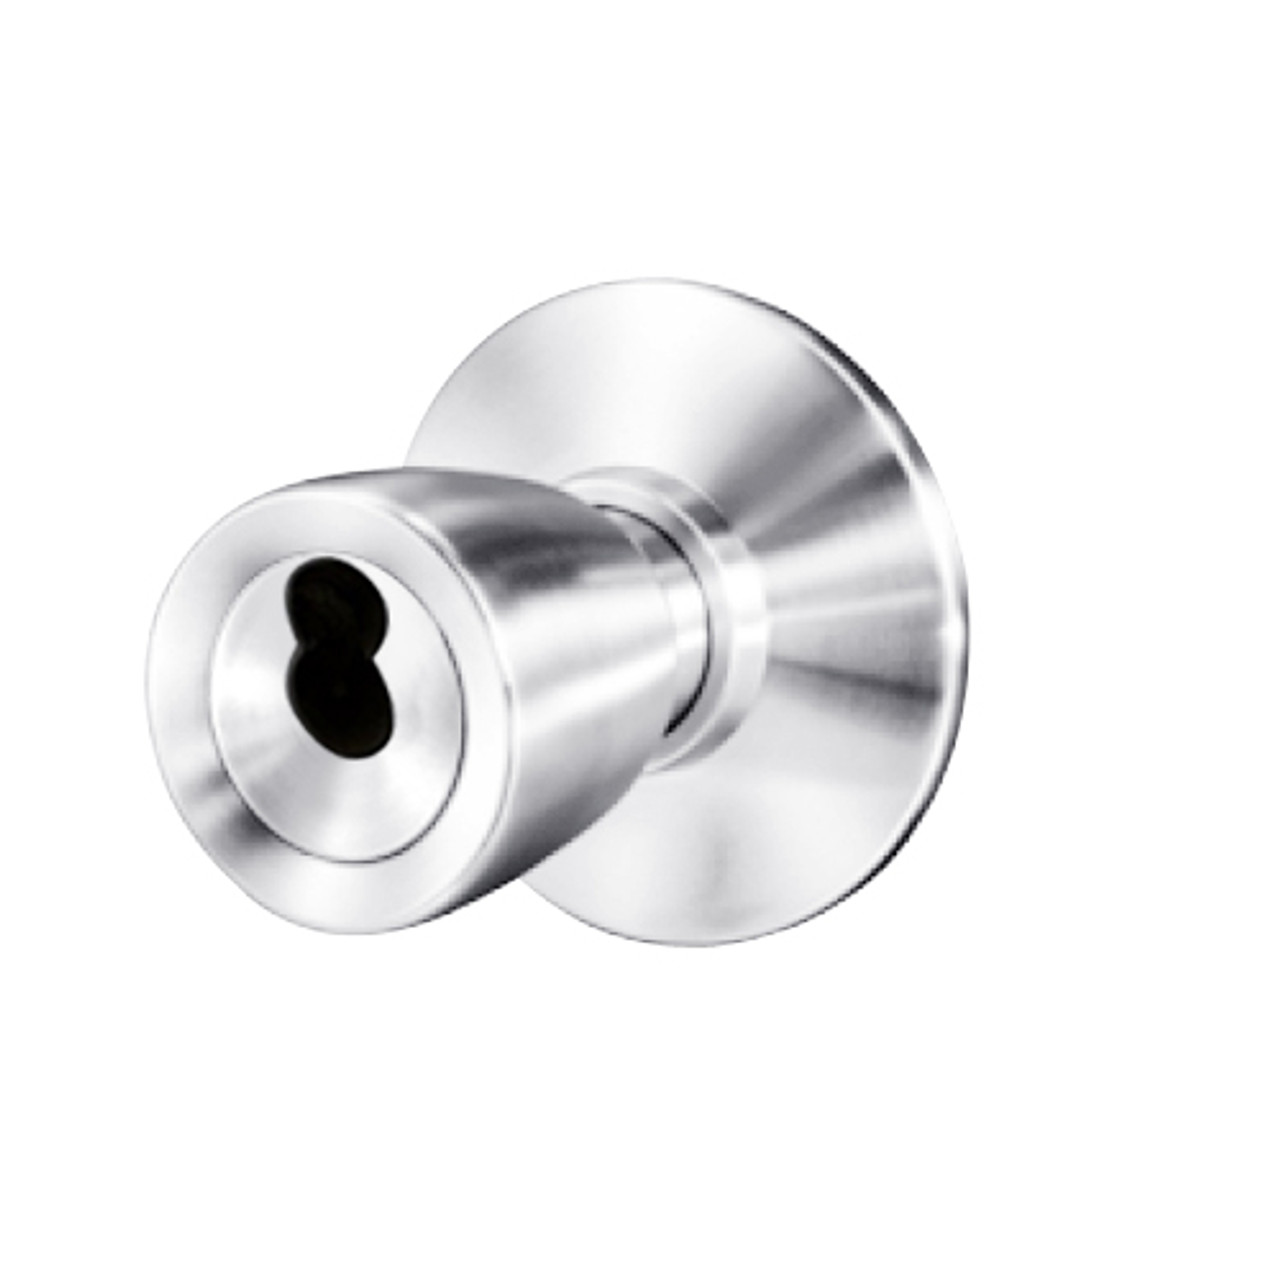 8K37XR6DSTK625 Best 8K Series Special Heavy Duty Cylindrical Knob Locks with Tulip Style in Bright Chrome